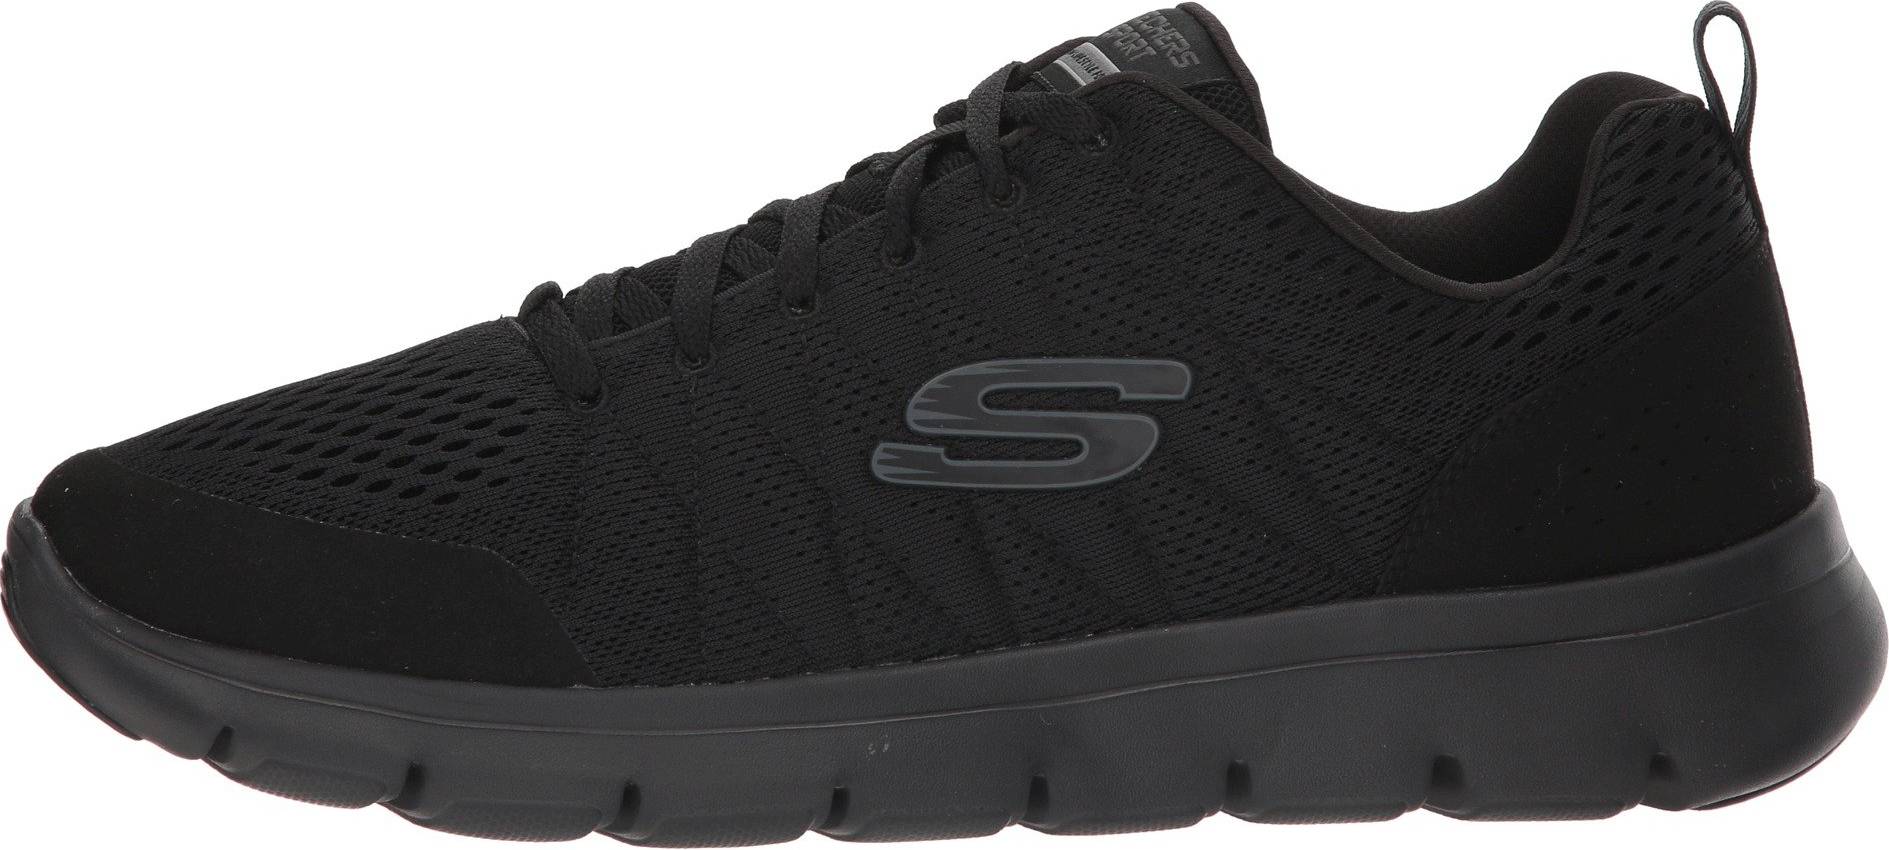 are skechers good for gym